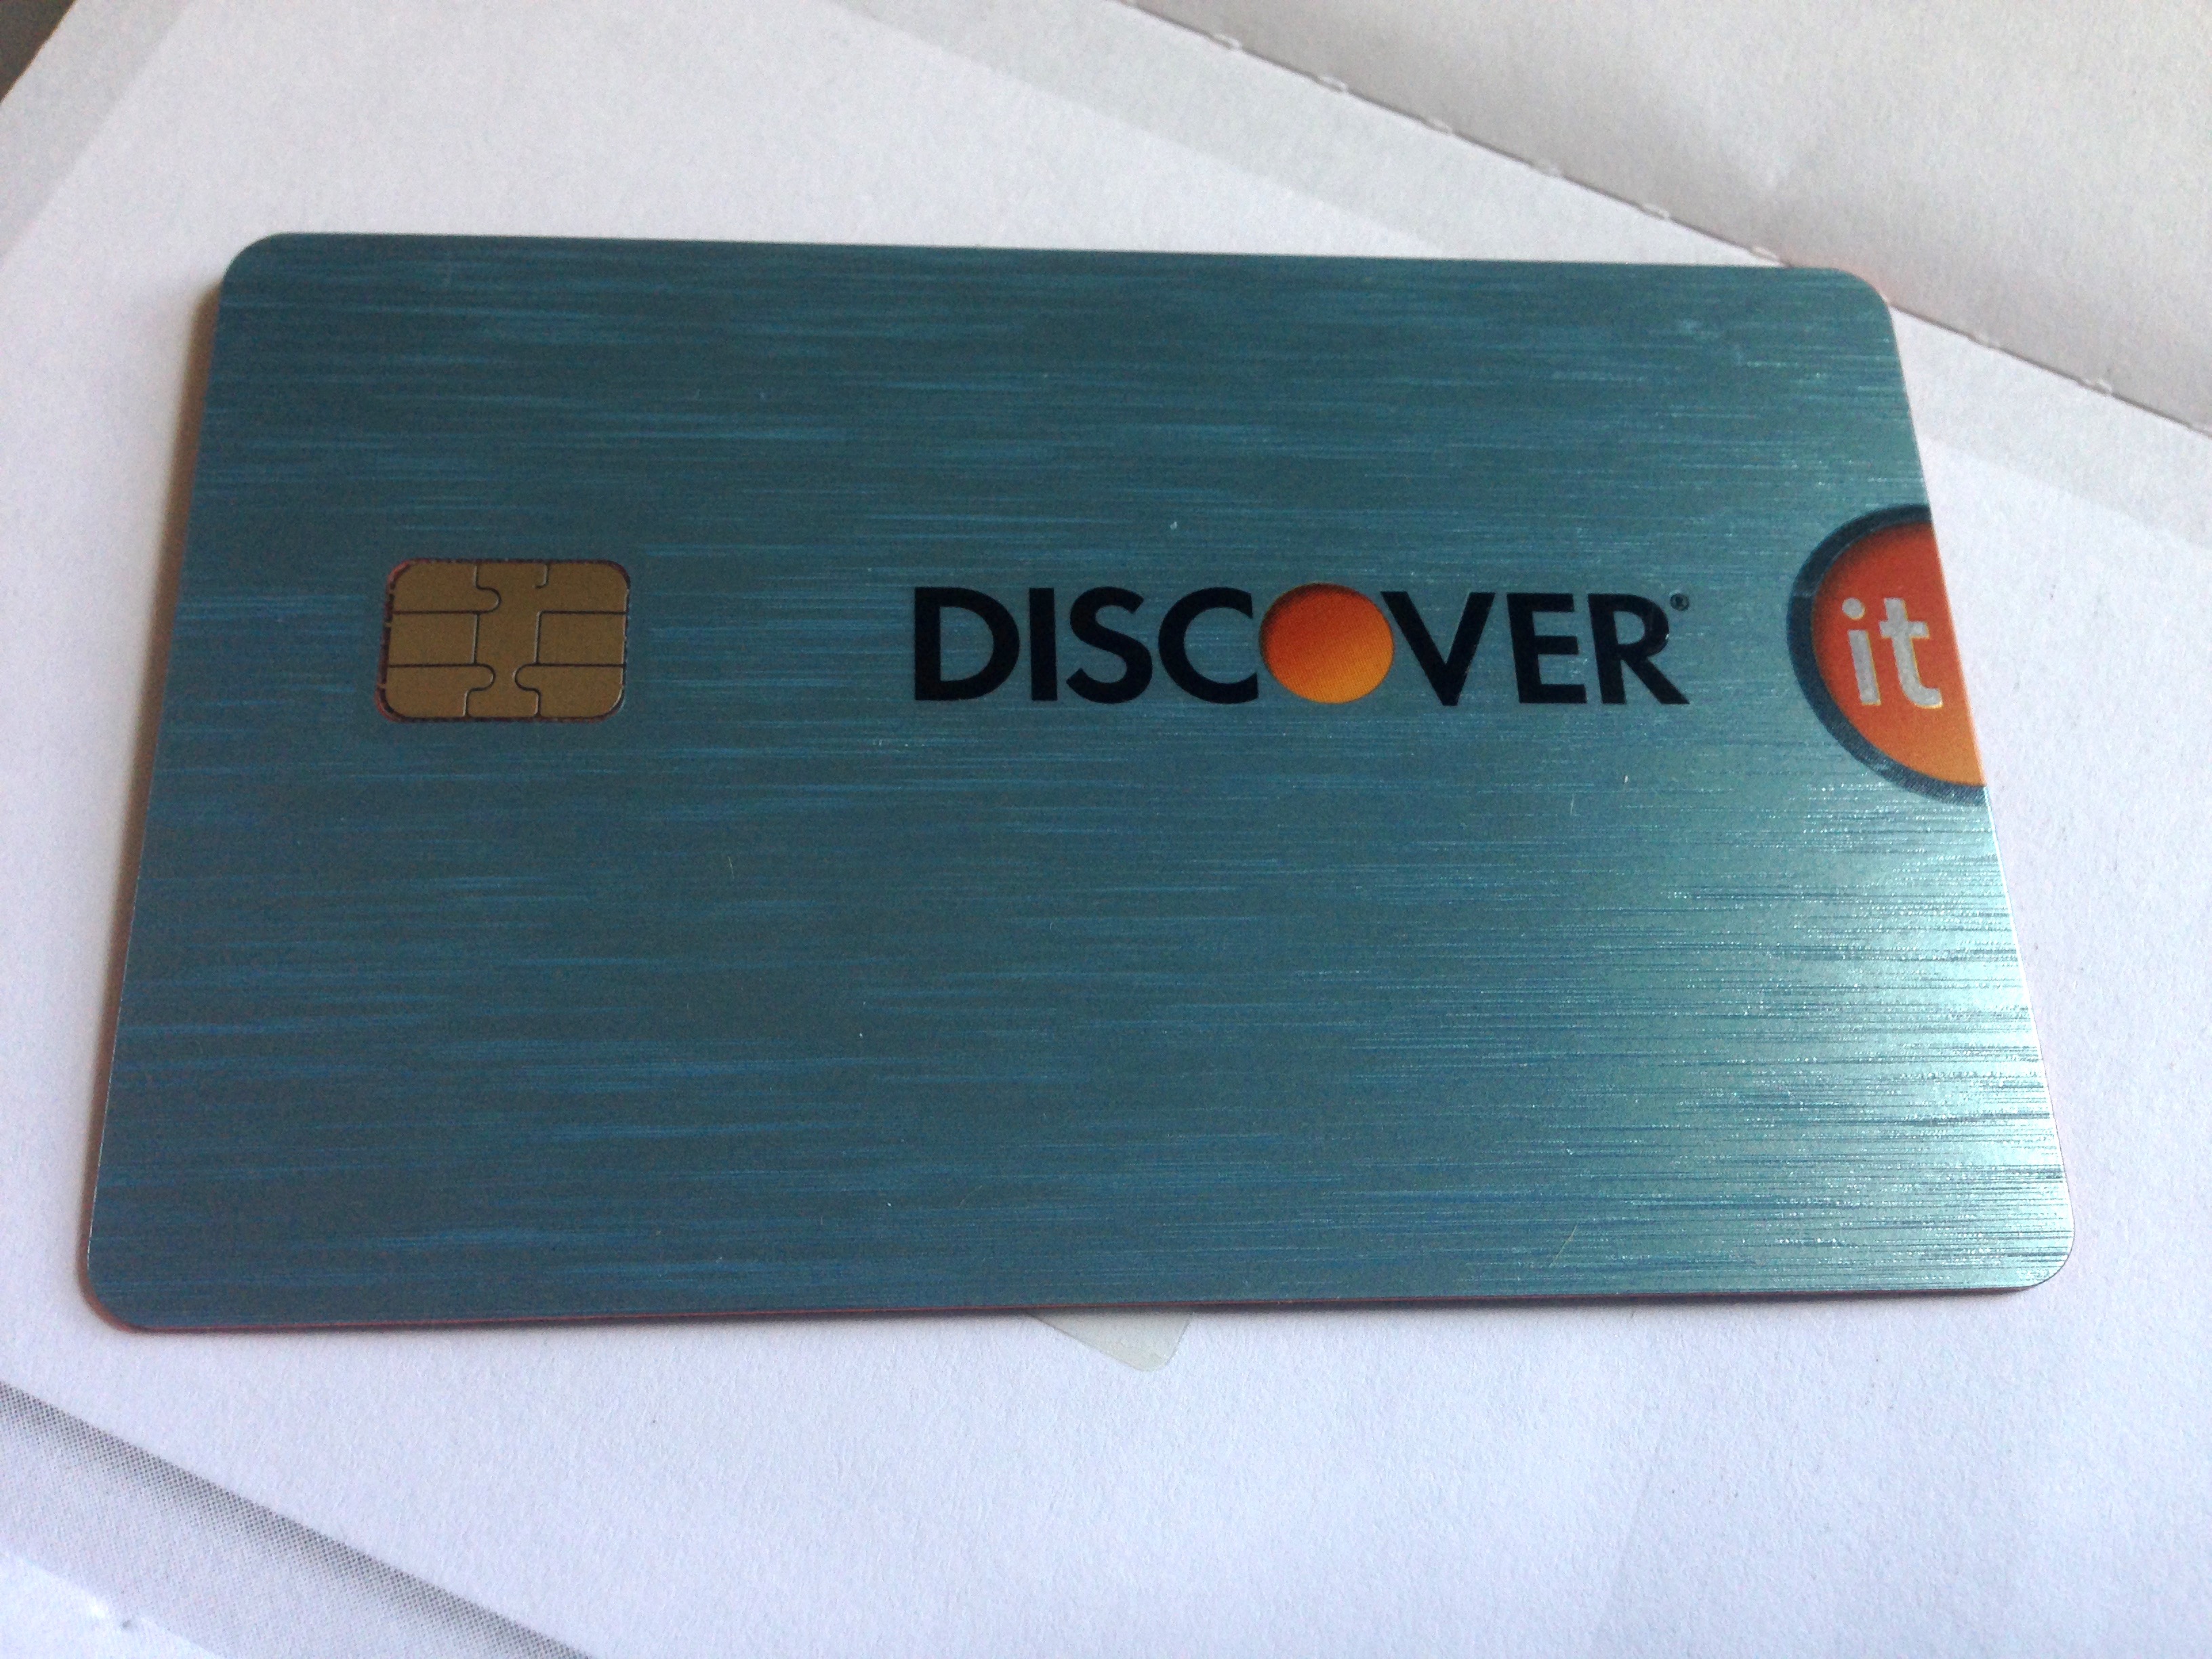 discover-it-cashback-match-is-an-amazing-cashback-card-for-the-1st